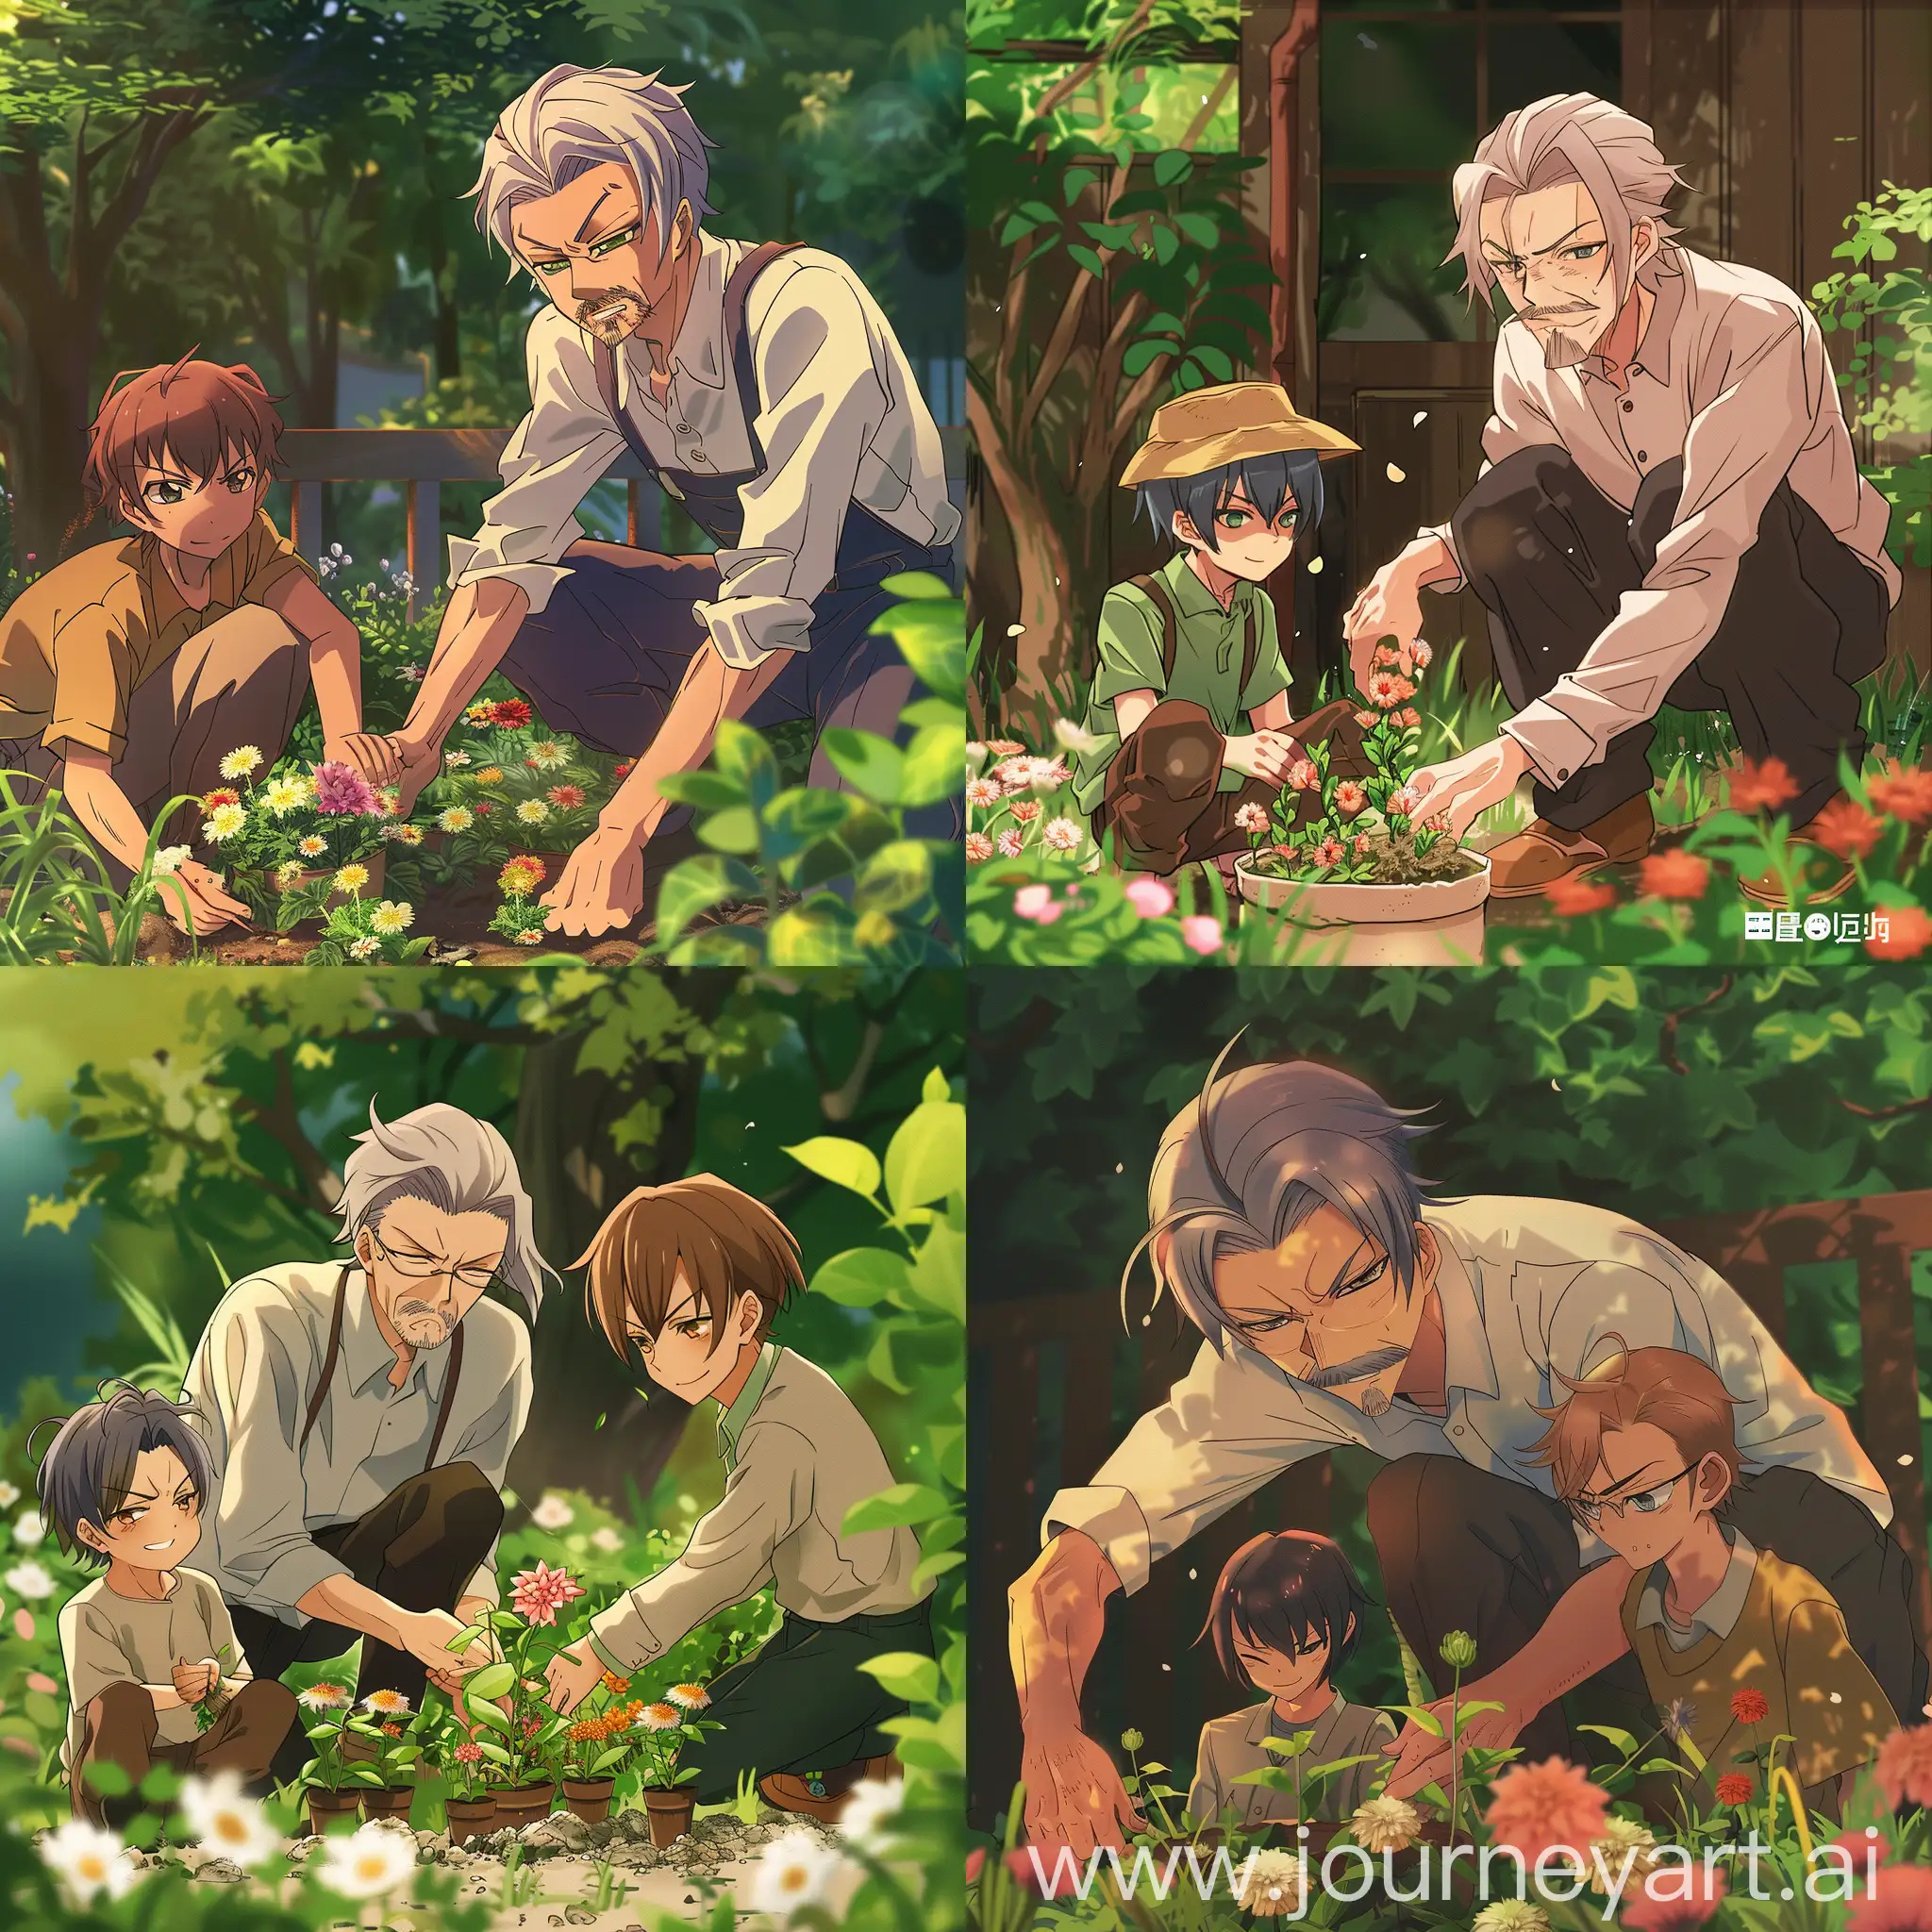 Elderly-Mentor-and-Youth-Cultivate-Blossoms-in-Anime-Garden